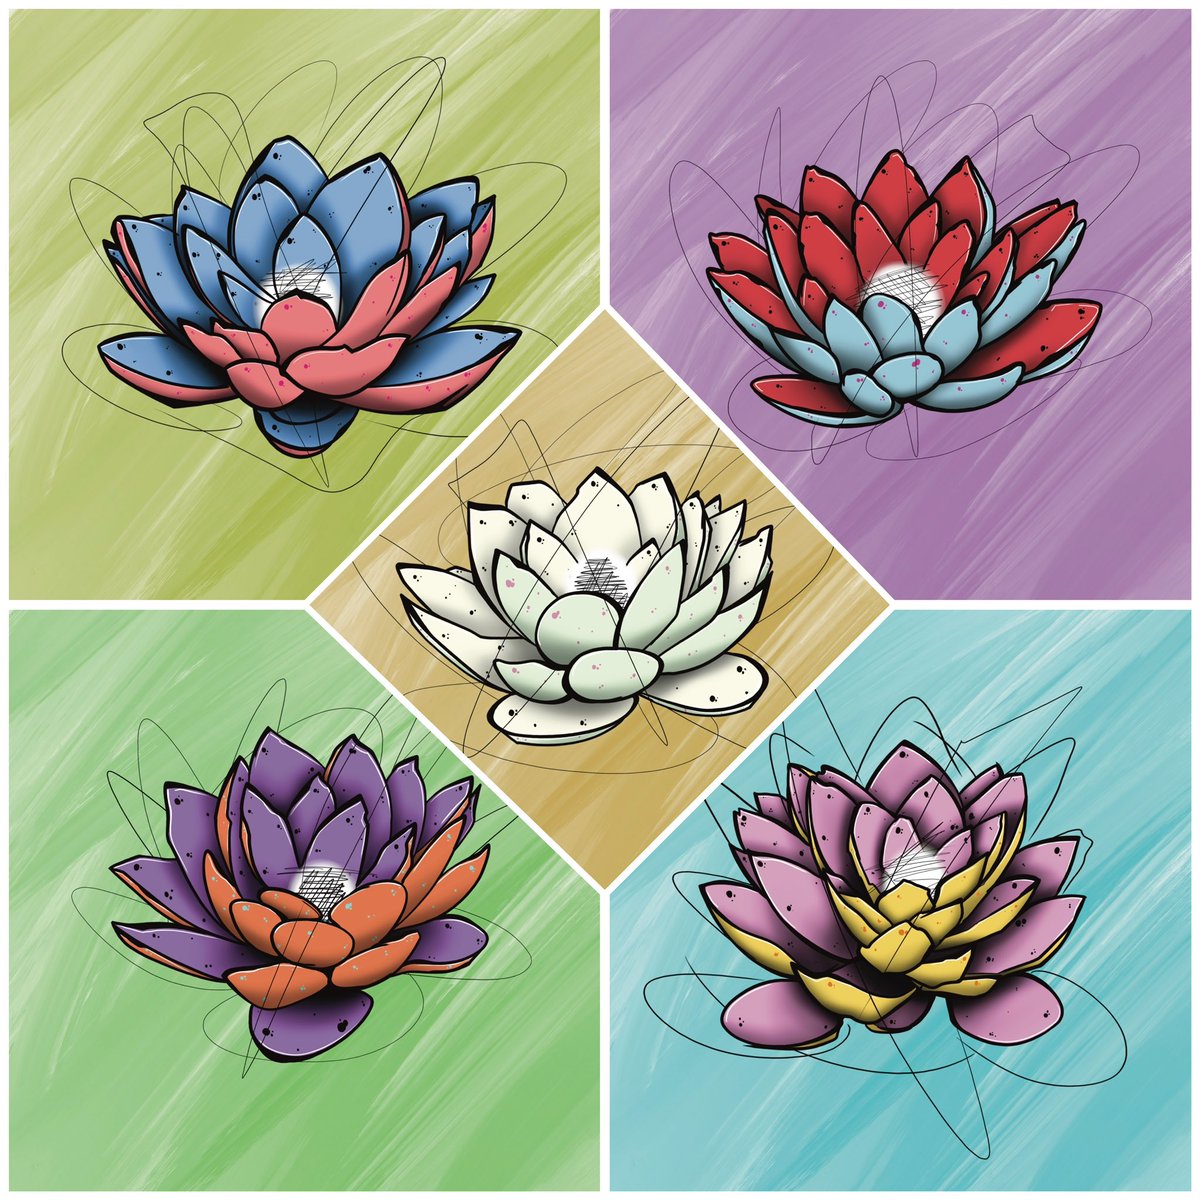 @scio78 “Rebirth and Renewal” Lotus flower is a beautiful and captivating flower that holds deep meanings in many cultures.. Especially in Eastern cultures, the lotus flower is considered a symbol of sacredness, purity, abundance, and spiritual growth.. At the same time Lotus flower is